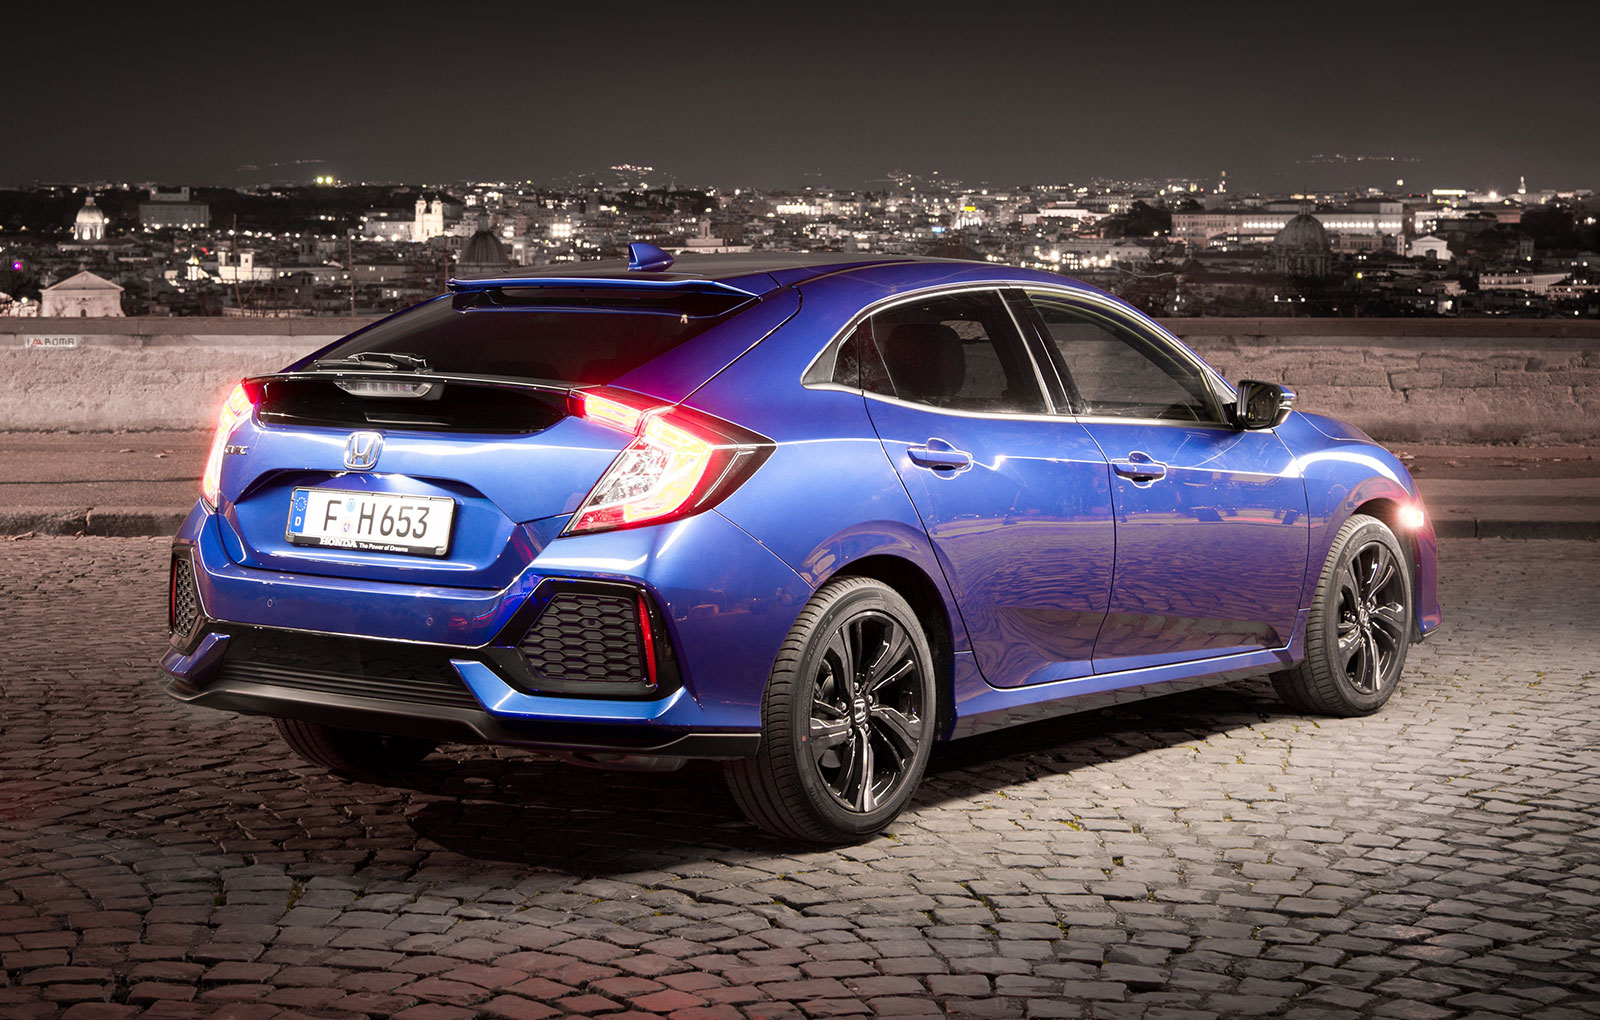 Honda Civic Gets 1.6 Diesel With 9-Speed Automatic -